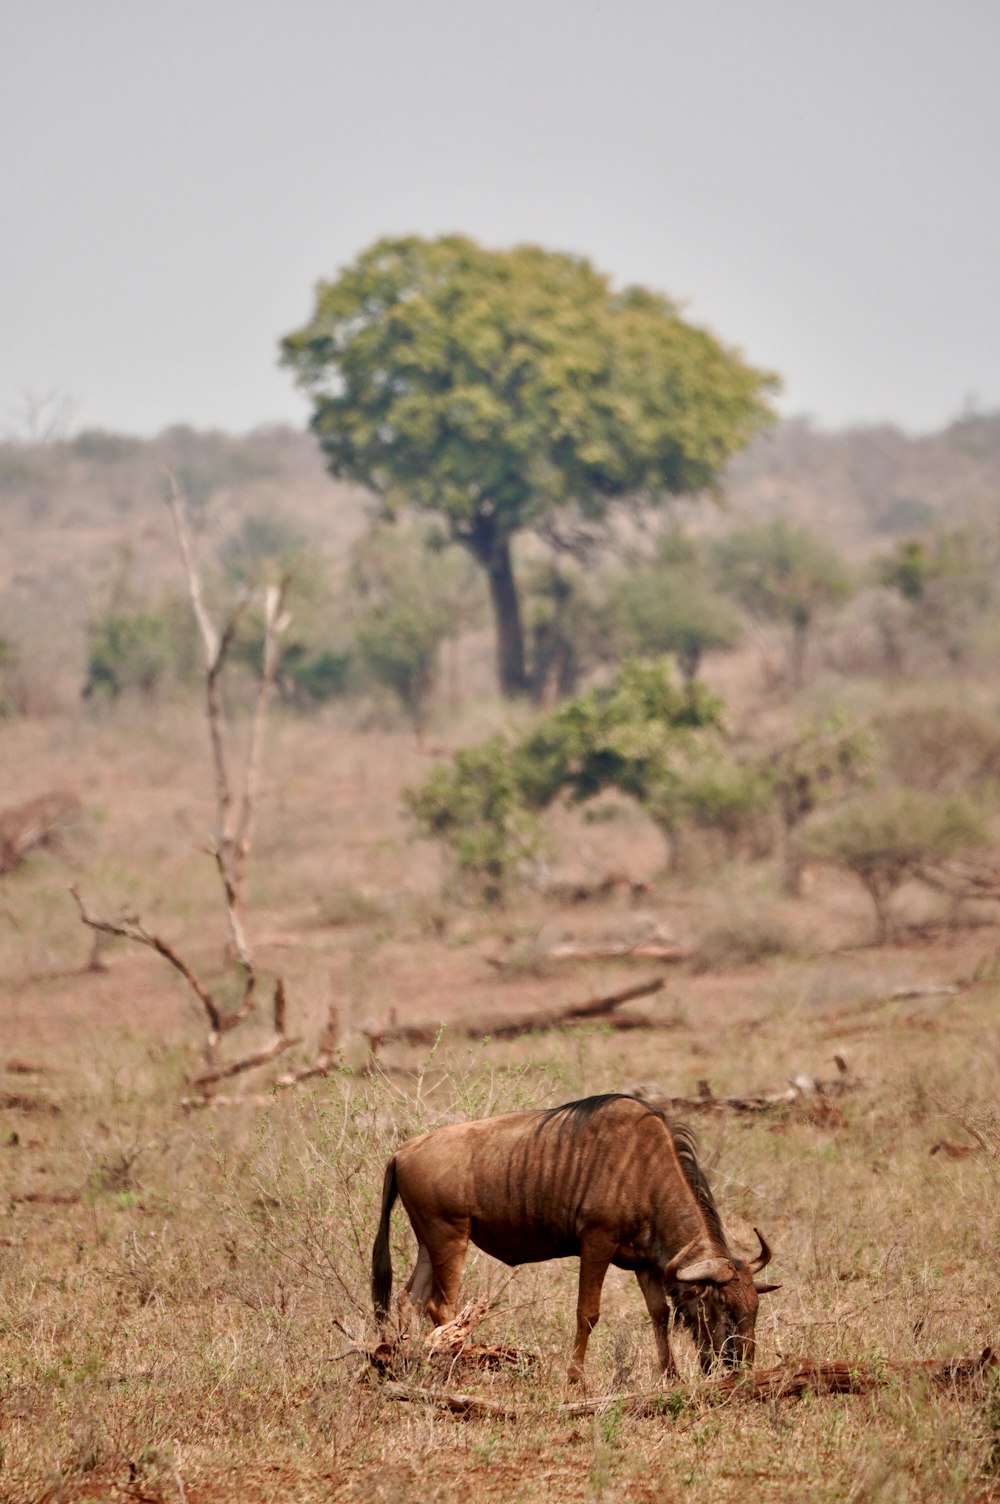 a wildebeest grazes in a field with trees in the background